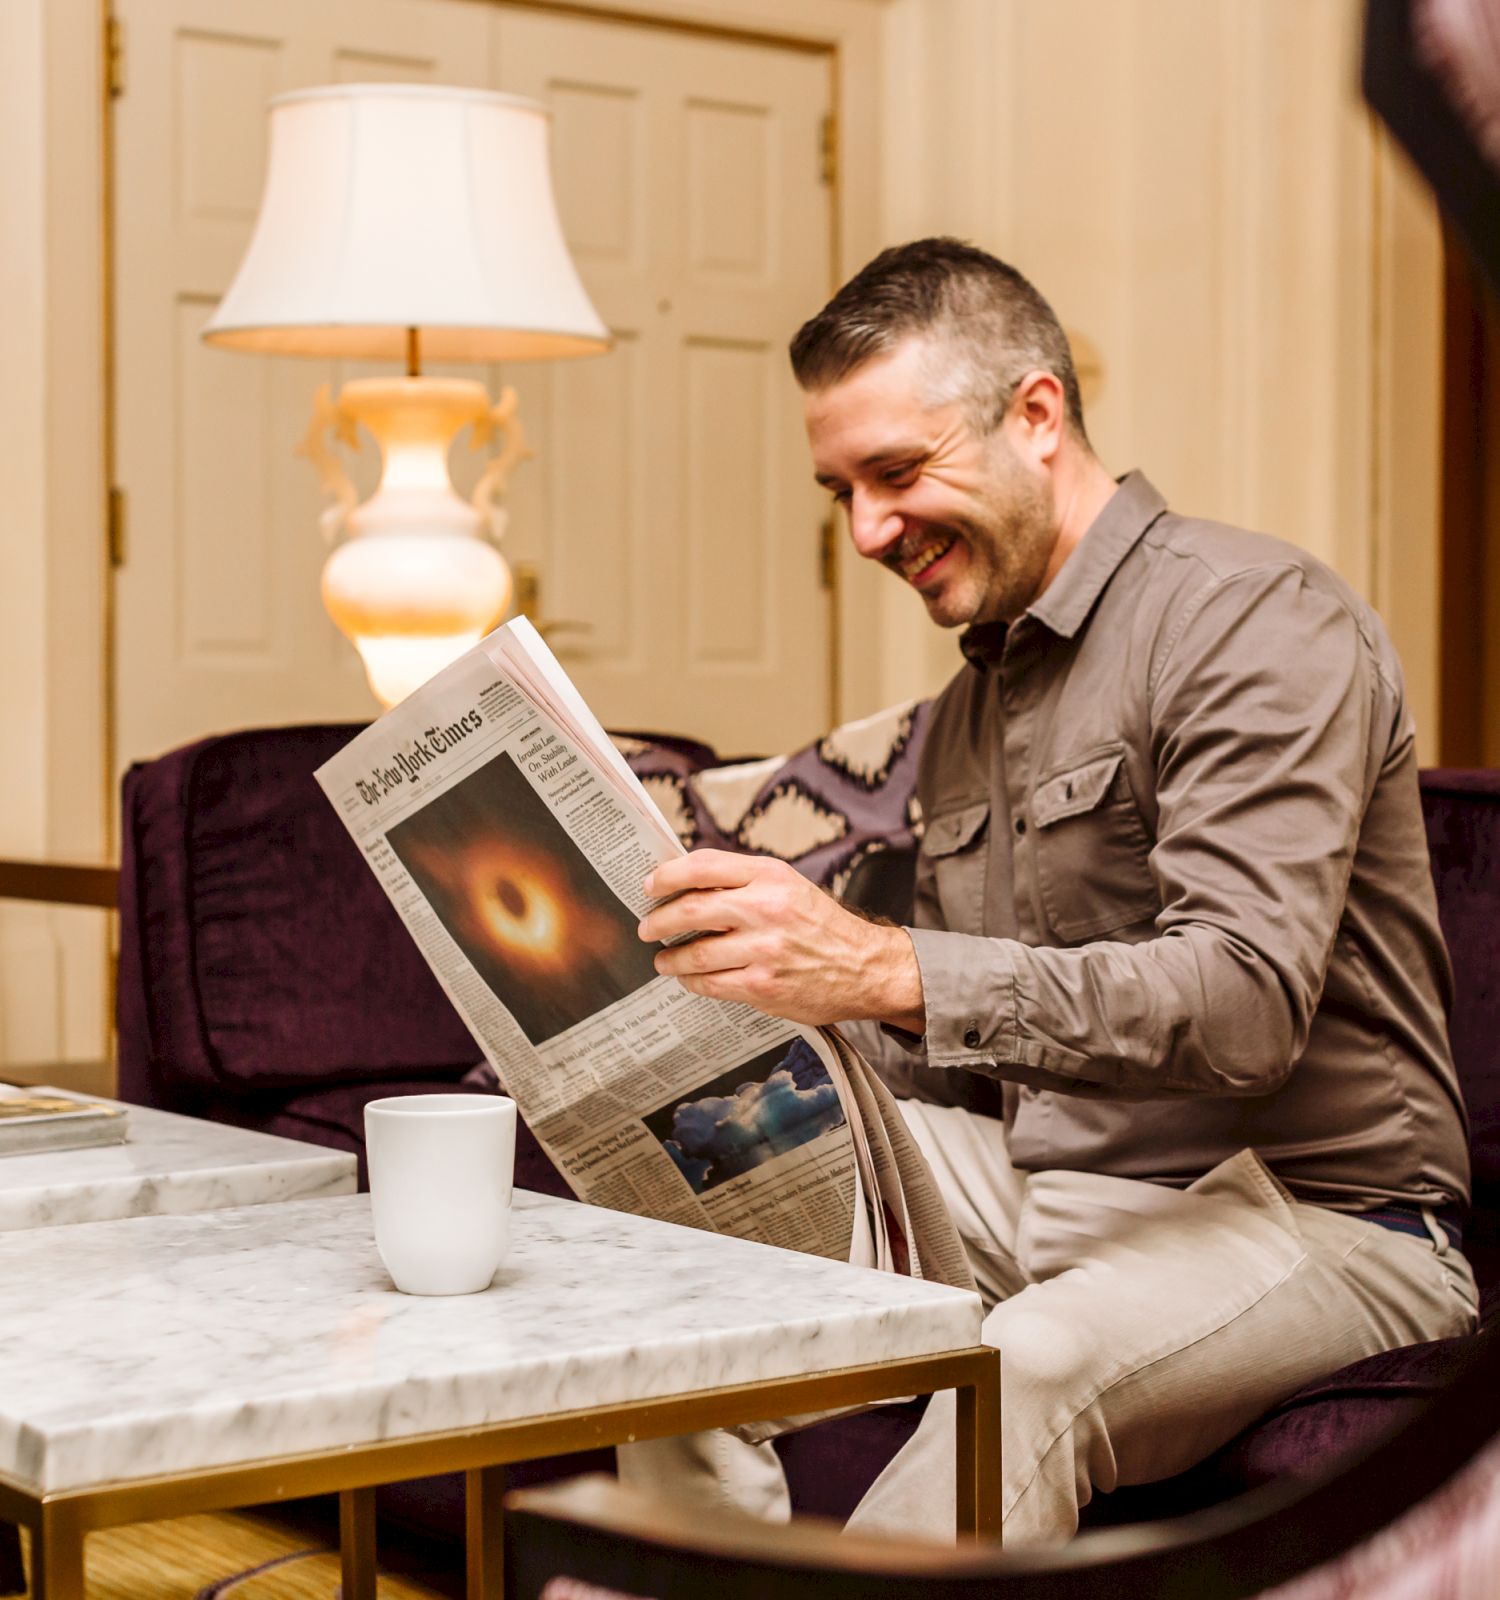 A man sitting in a cozy room is smiling while reading a newspaper at a marble table, with a lamp and coffee cup nearby.